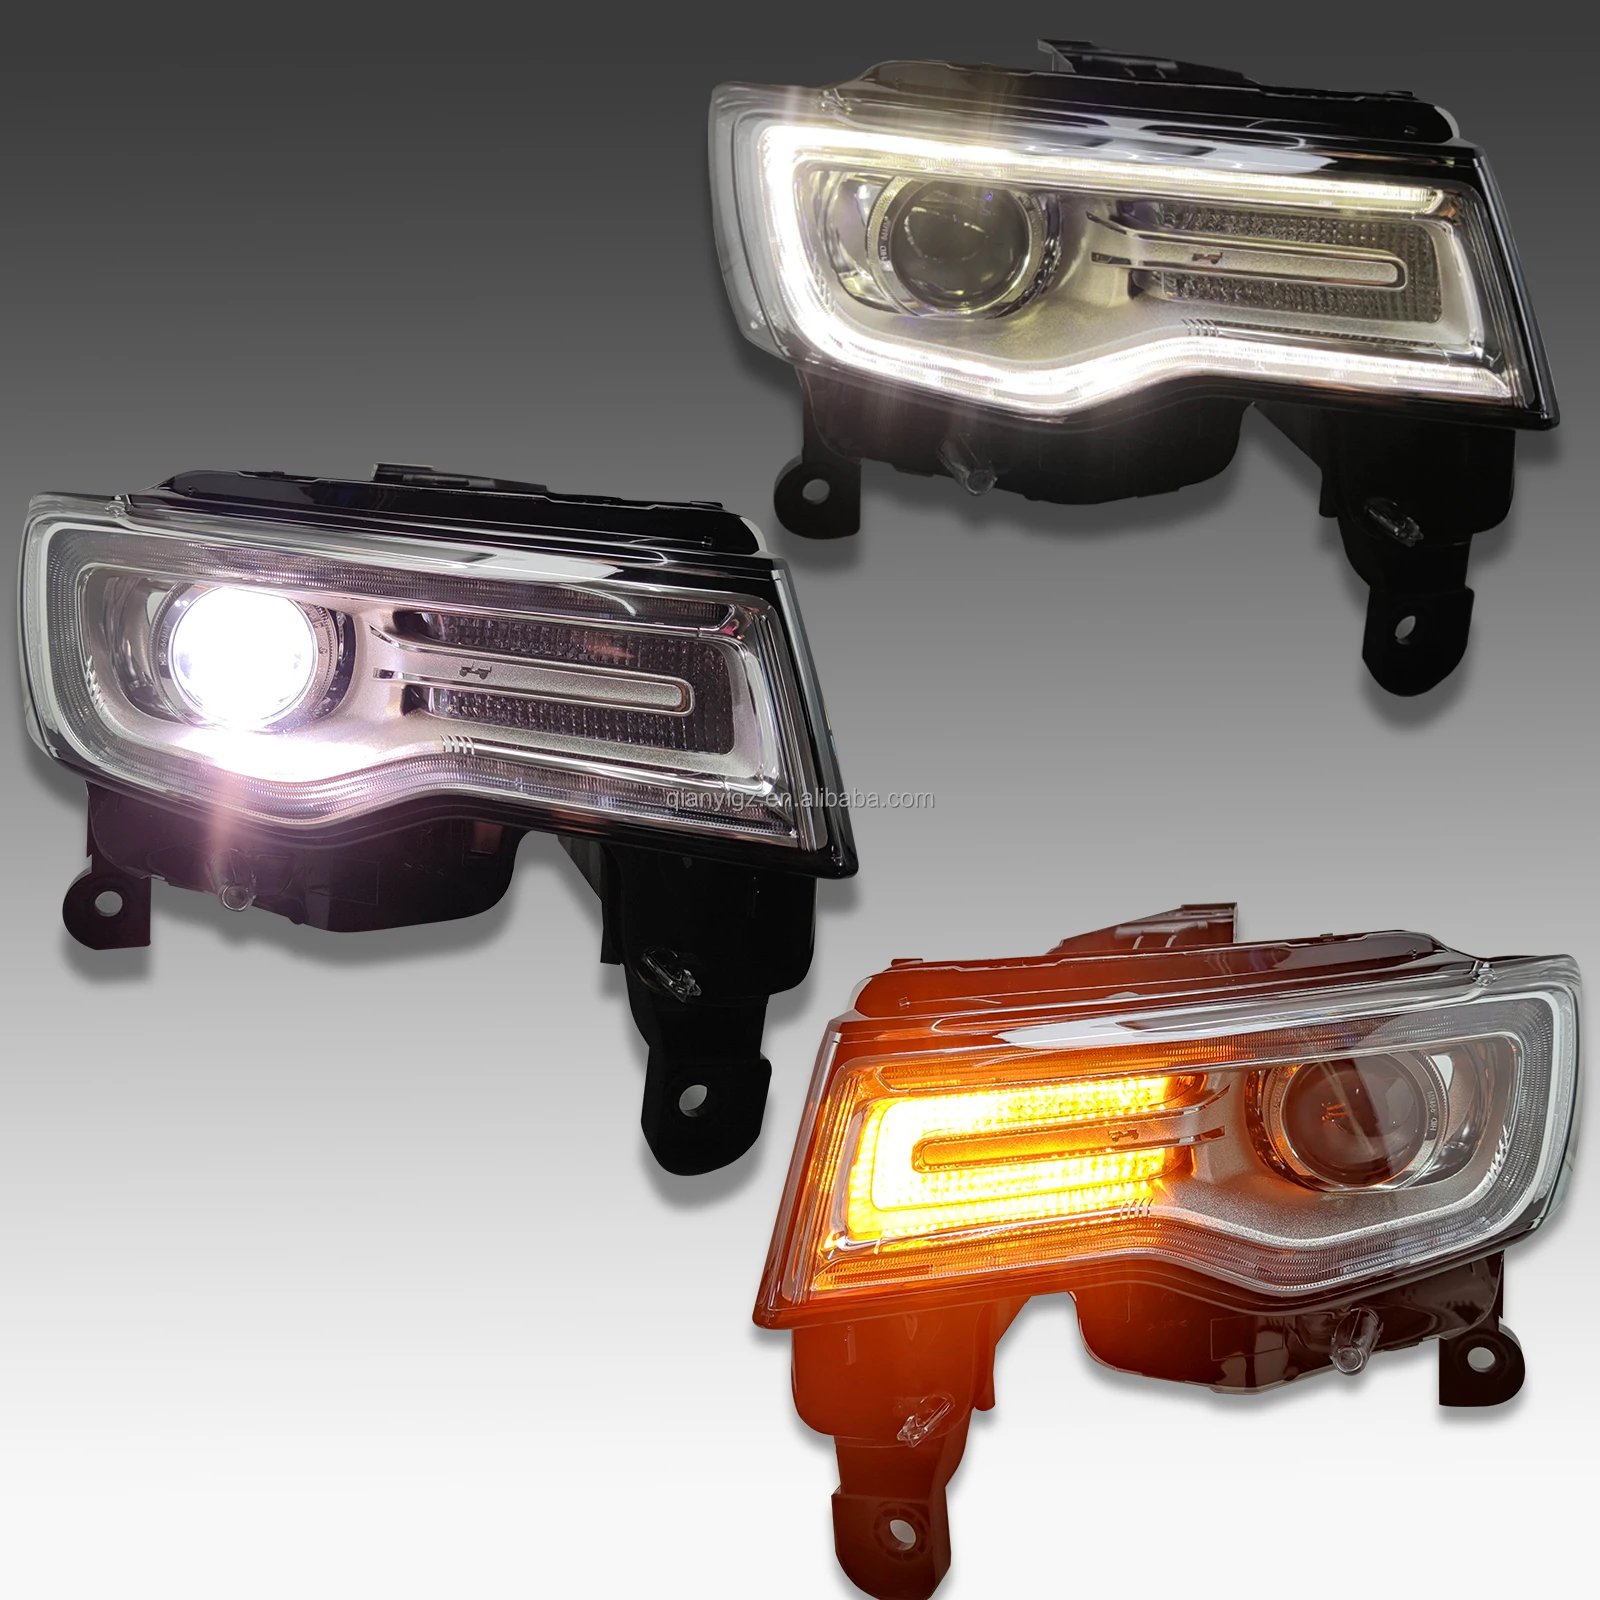 Compatible with 2016 Jeep Grand Cherokee xenon headlight LED daytime running lights original beam disassembly accessories (1600568919171)